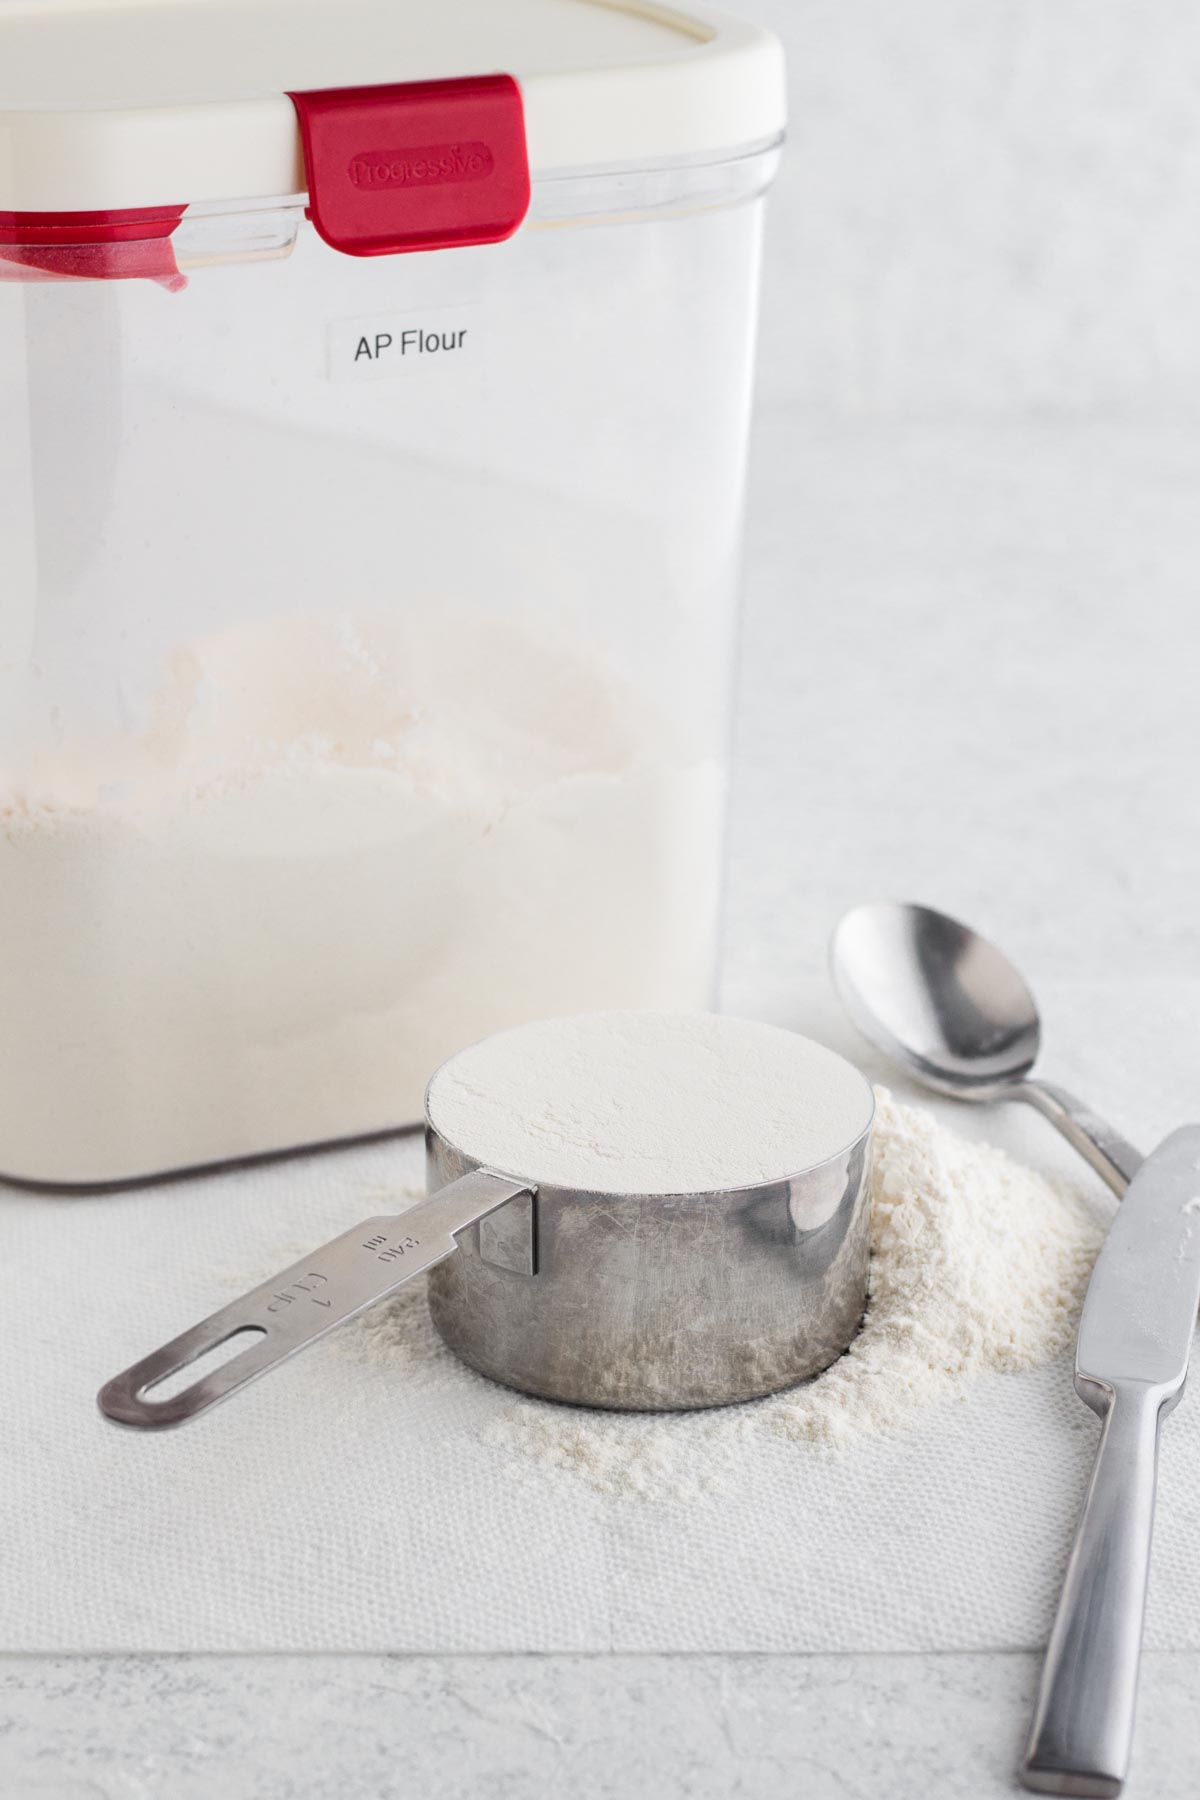 Flour in a measuring cup with a spoon, butter knife, and flour canister on a white surface.